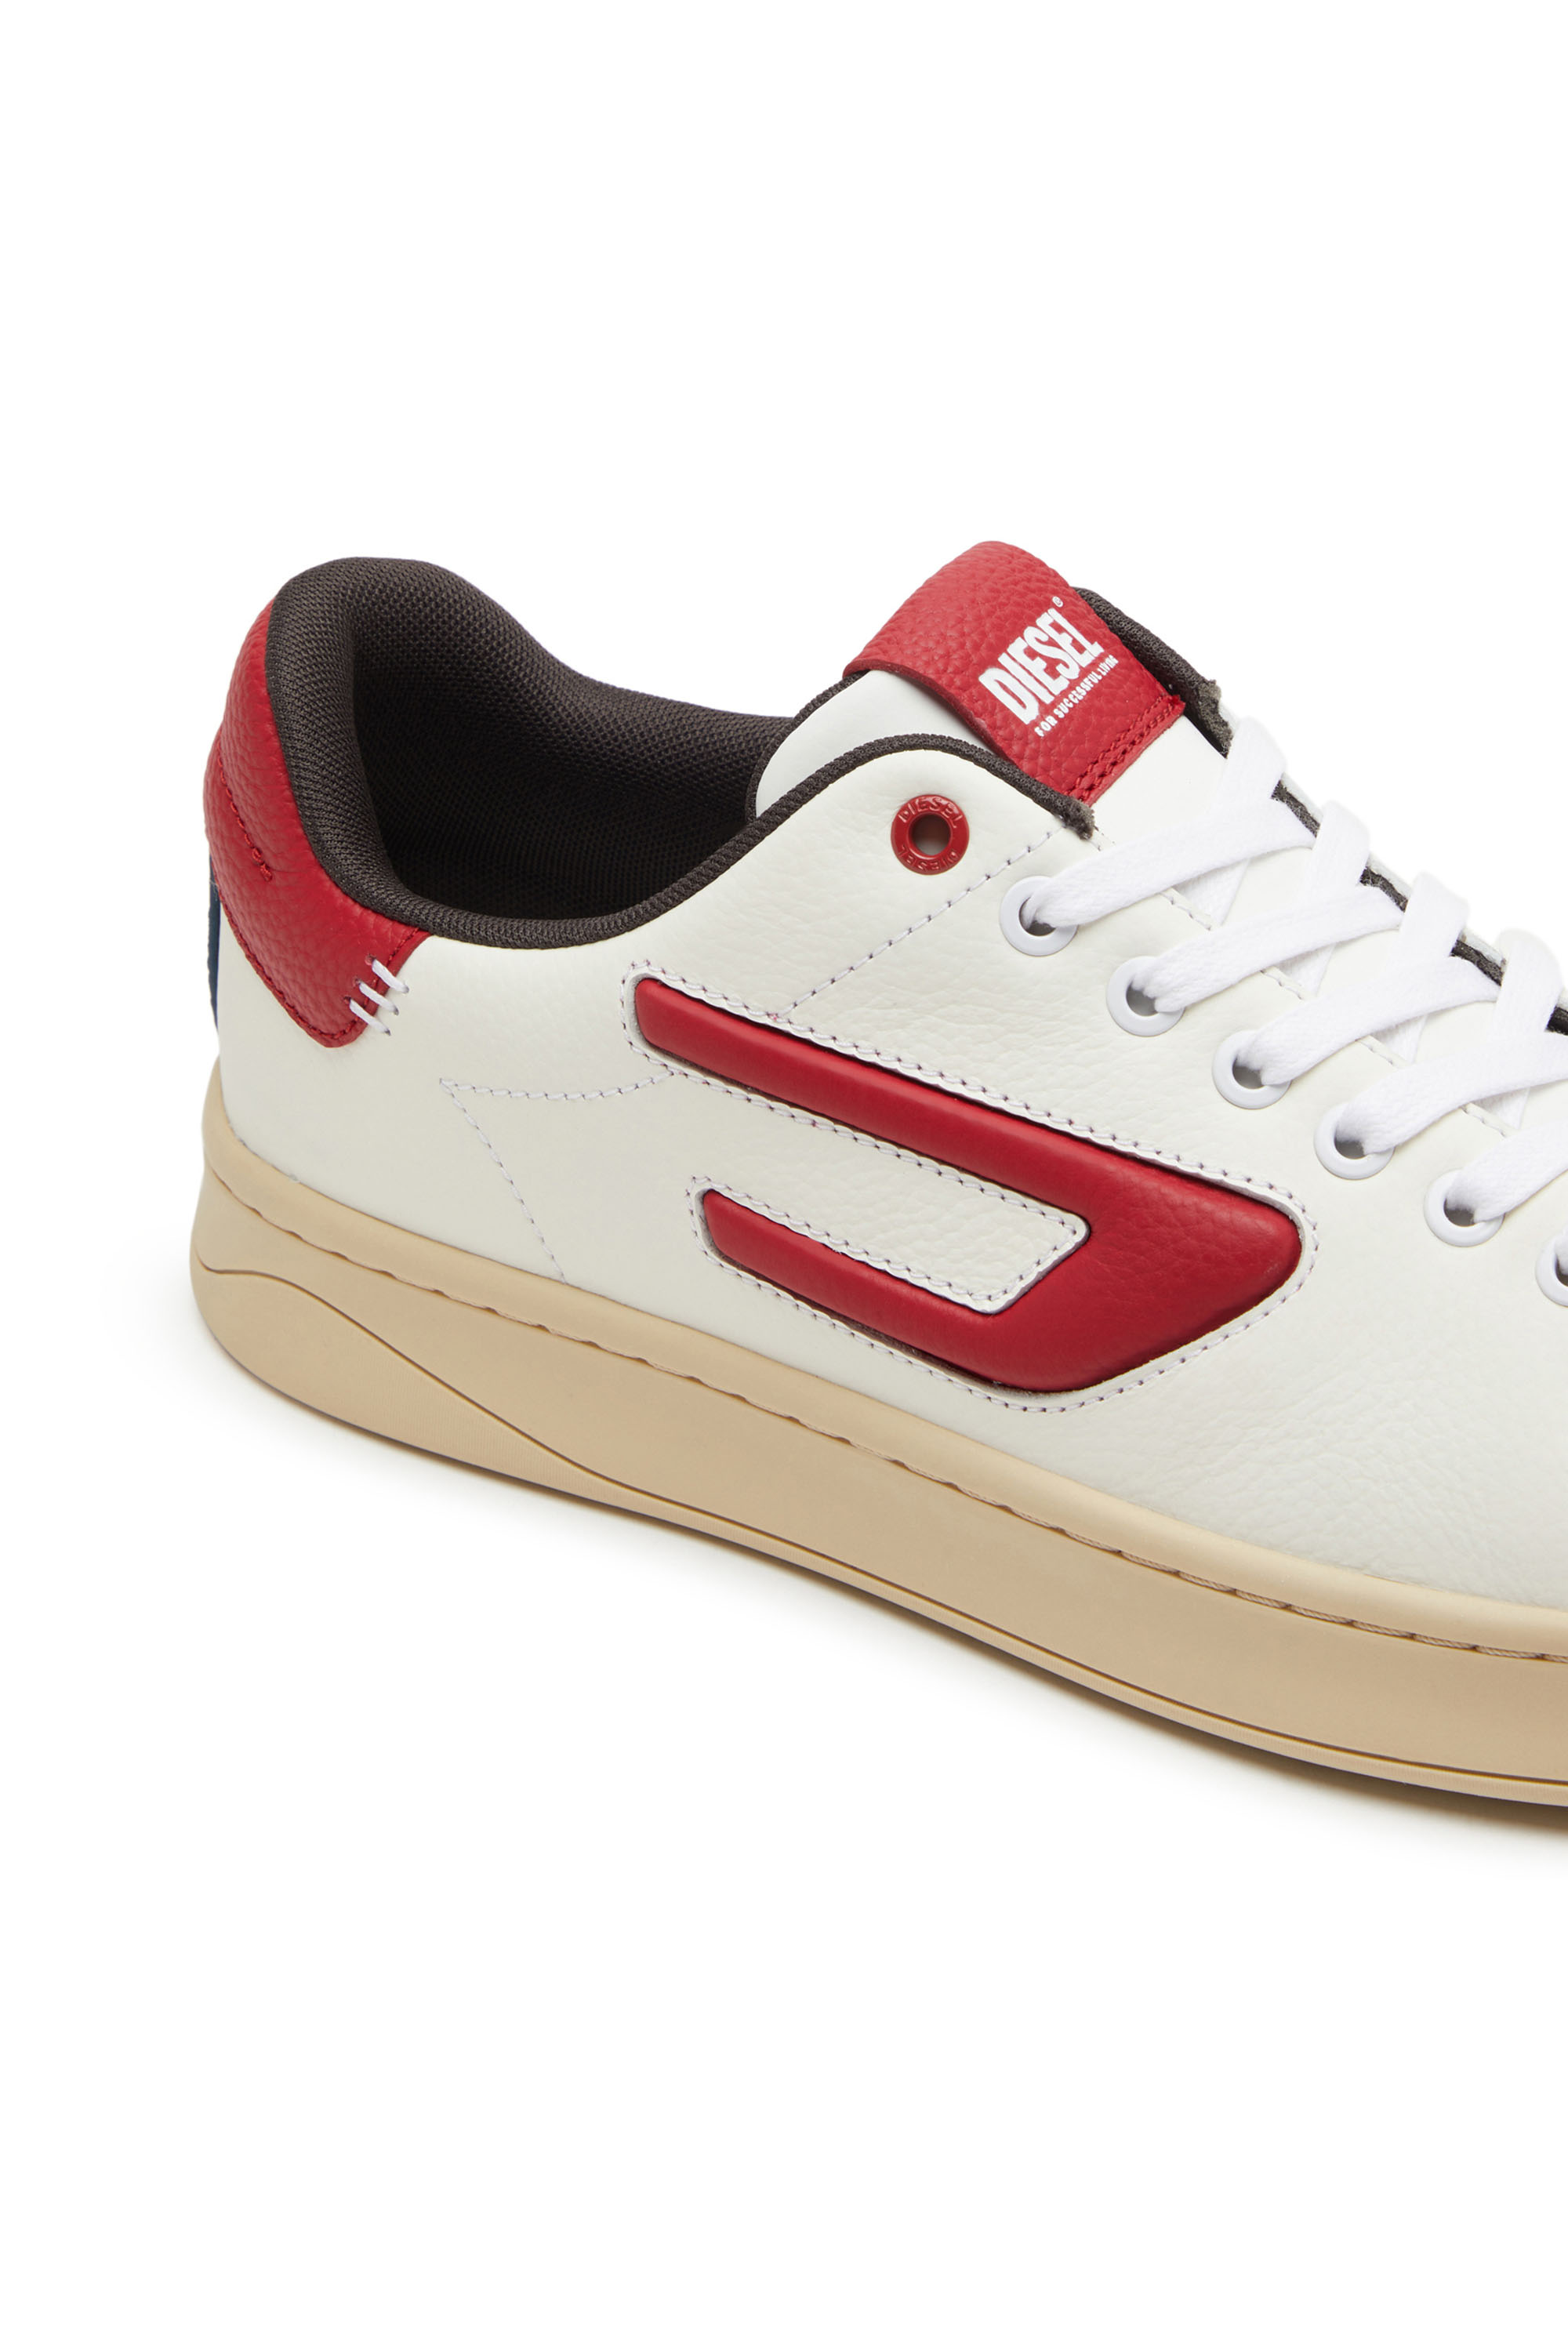 Diesel - S-ATHENE LOW, Bianco/Rosso - Image 6